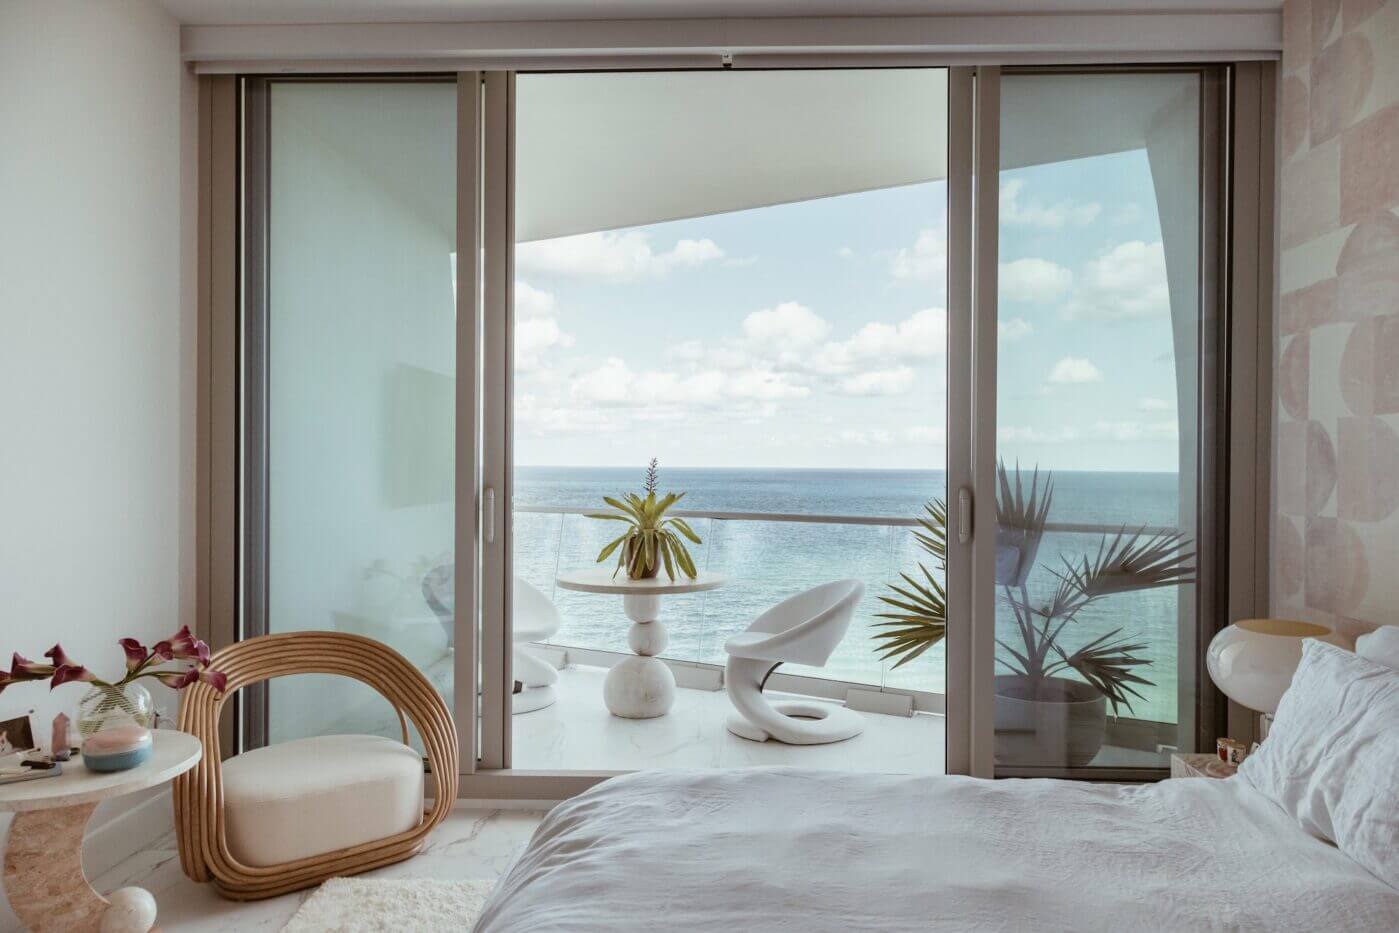 Luxury Modern Bedrooms With a Breathtaking View